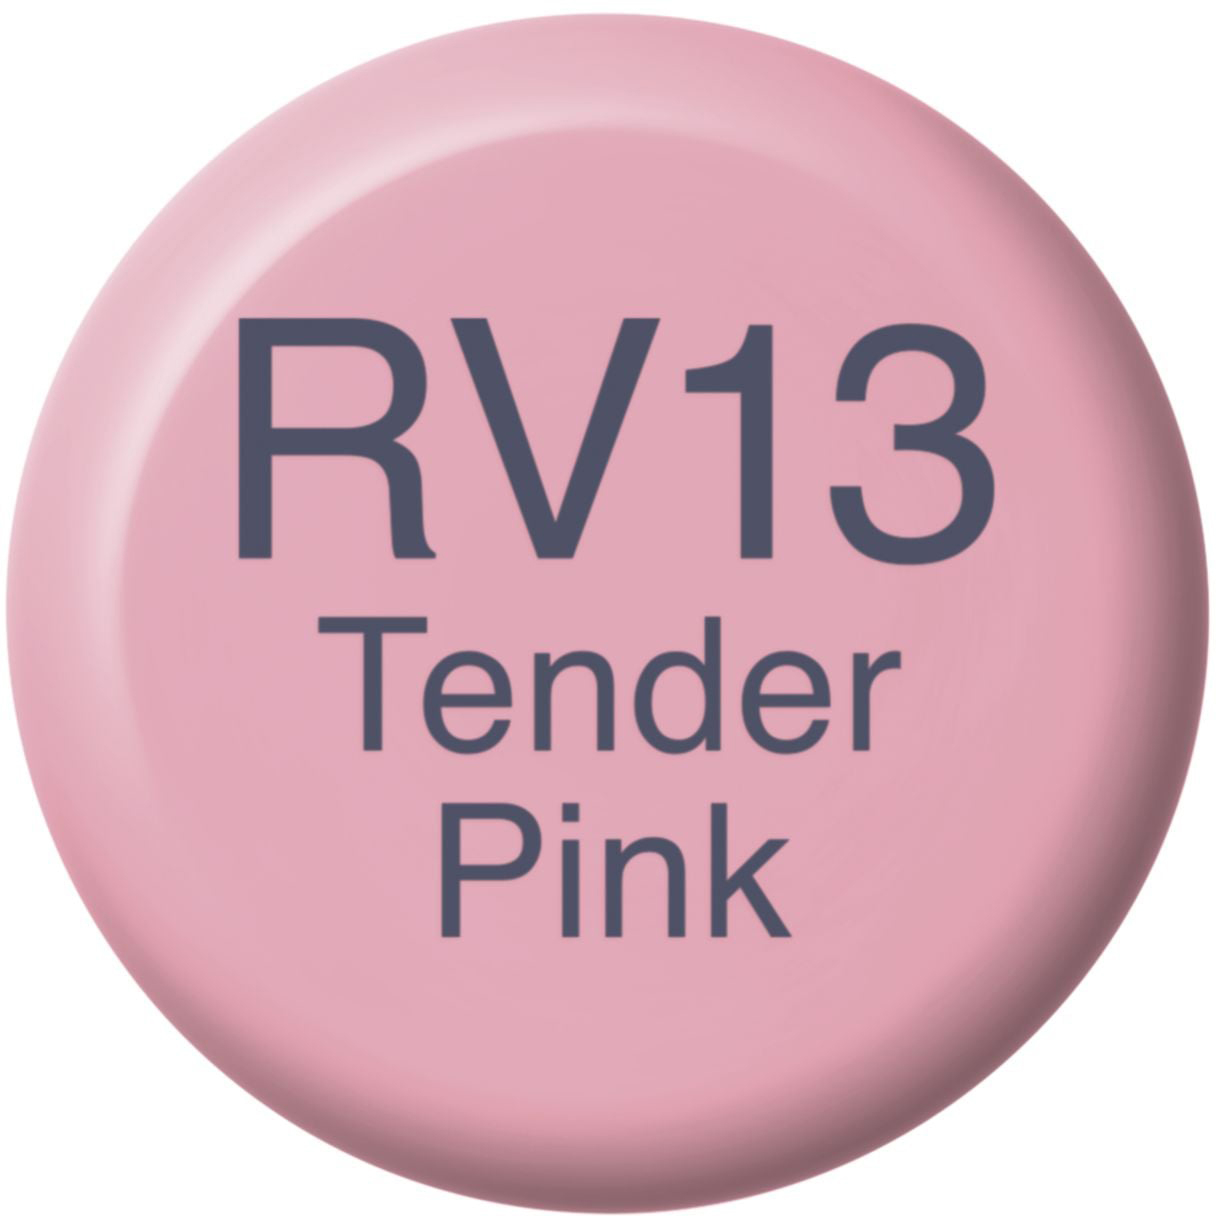 COPIC Ink Refill 21076178 RV13 - Tender Pink